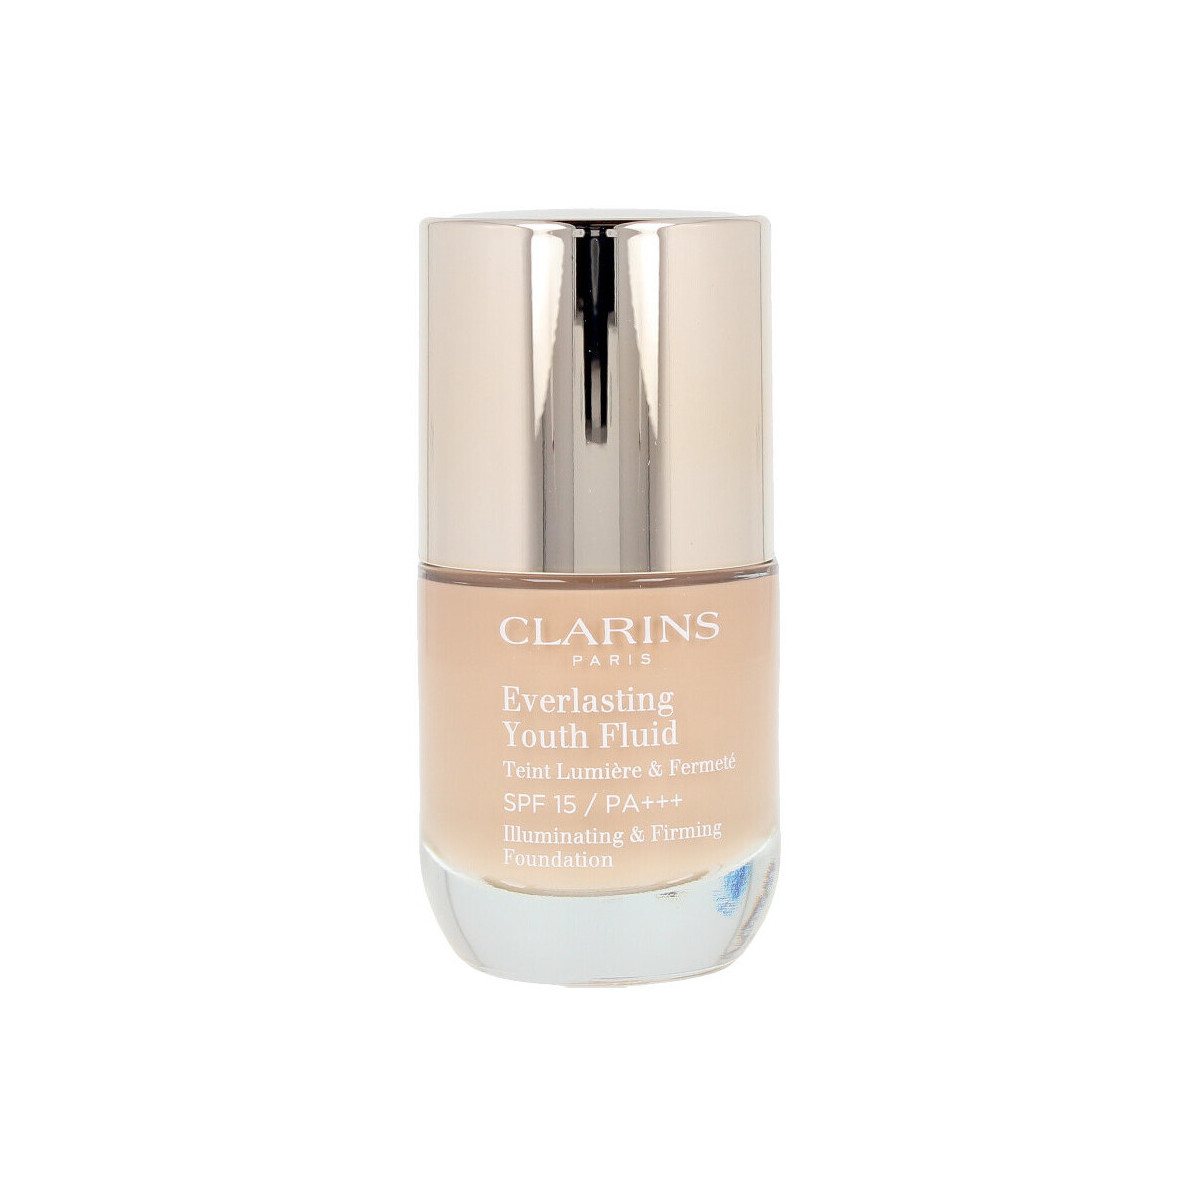 Beauty Make-up & Foundation  Clarins Everlasting Youth Fluid 112 -amber 